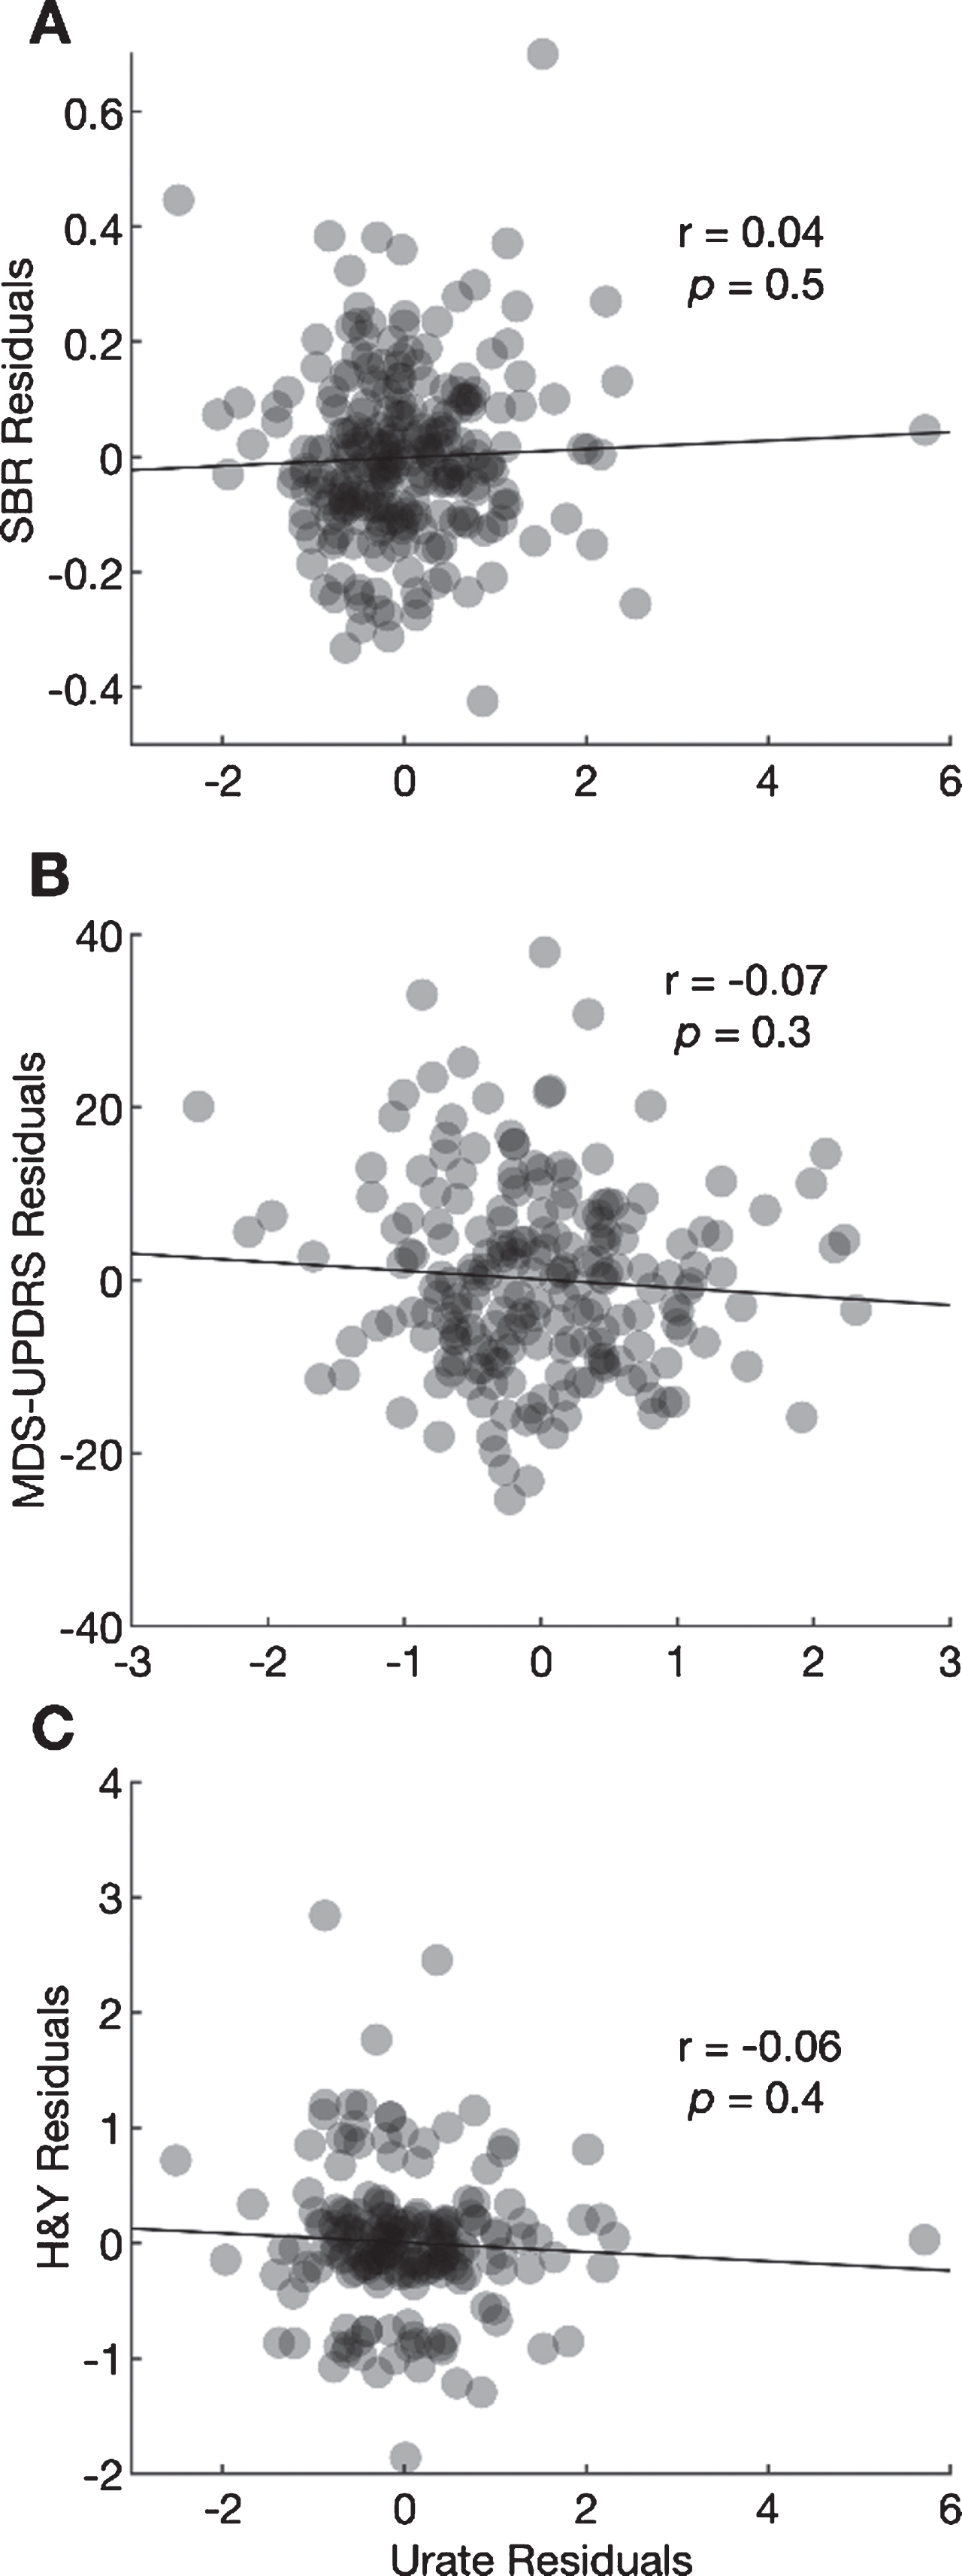 Scatter plots between the residuals from a regression of 4-year change in ipsilateral putamen SBR (A), MDS-UPDRS Part III score (B), and H&Y stage (C) and residuals from regressions of 4-year change in urate. Pearson coefficients and their p-values are shown for each correlation.